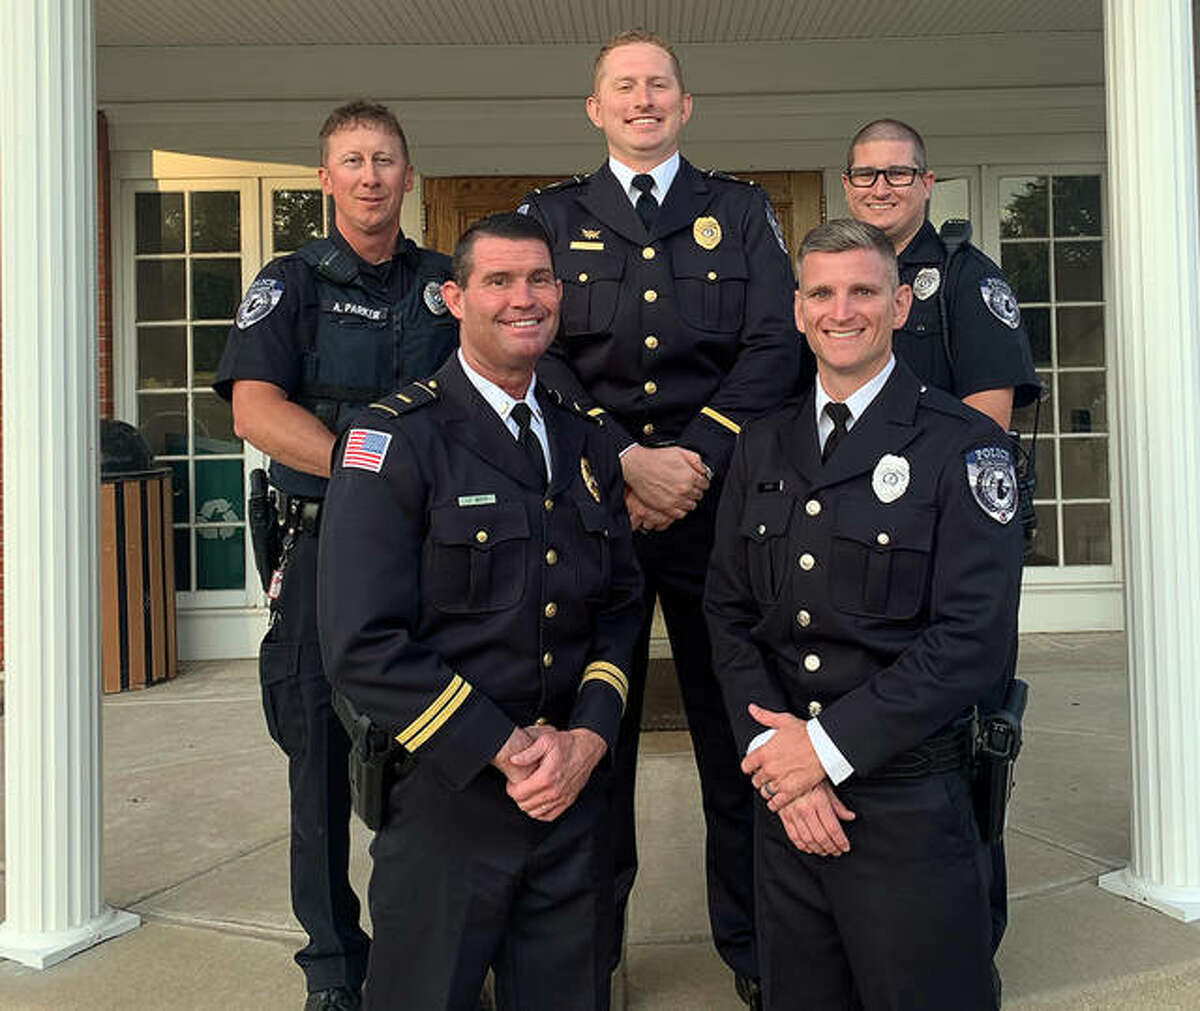 Front row, left to right, Glen Carbon Police Department’s Lt. Wayne White and Officer Ross Tyler. Middle row, left to right, Officer Gerard Spratt, Sgt. Justin Click and Officer Andrew Parker.